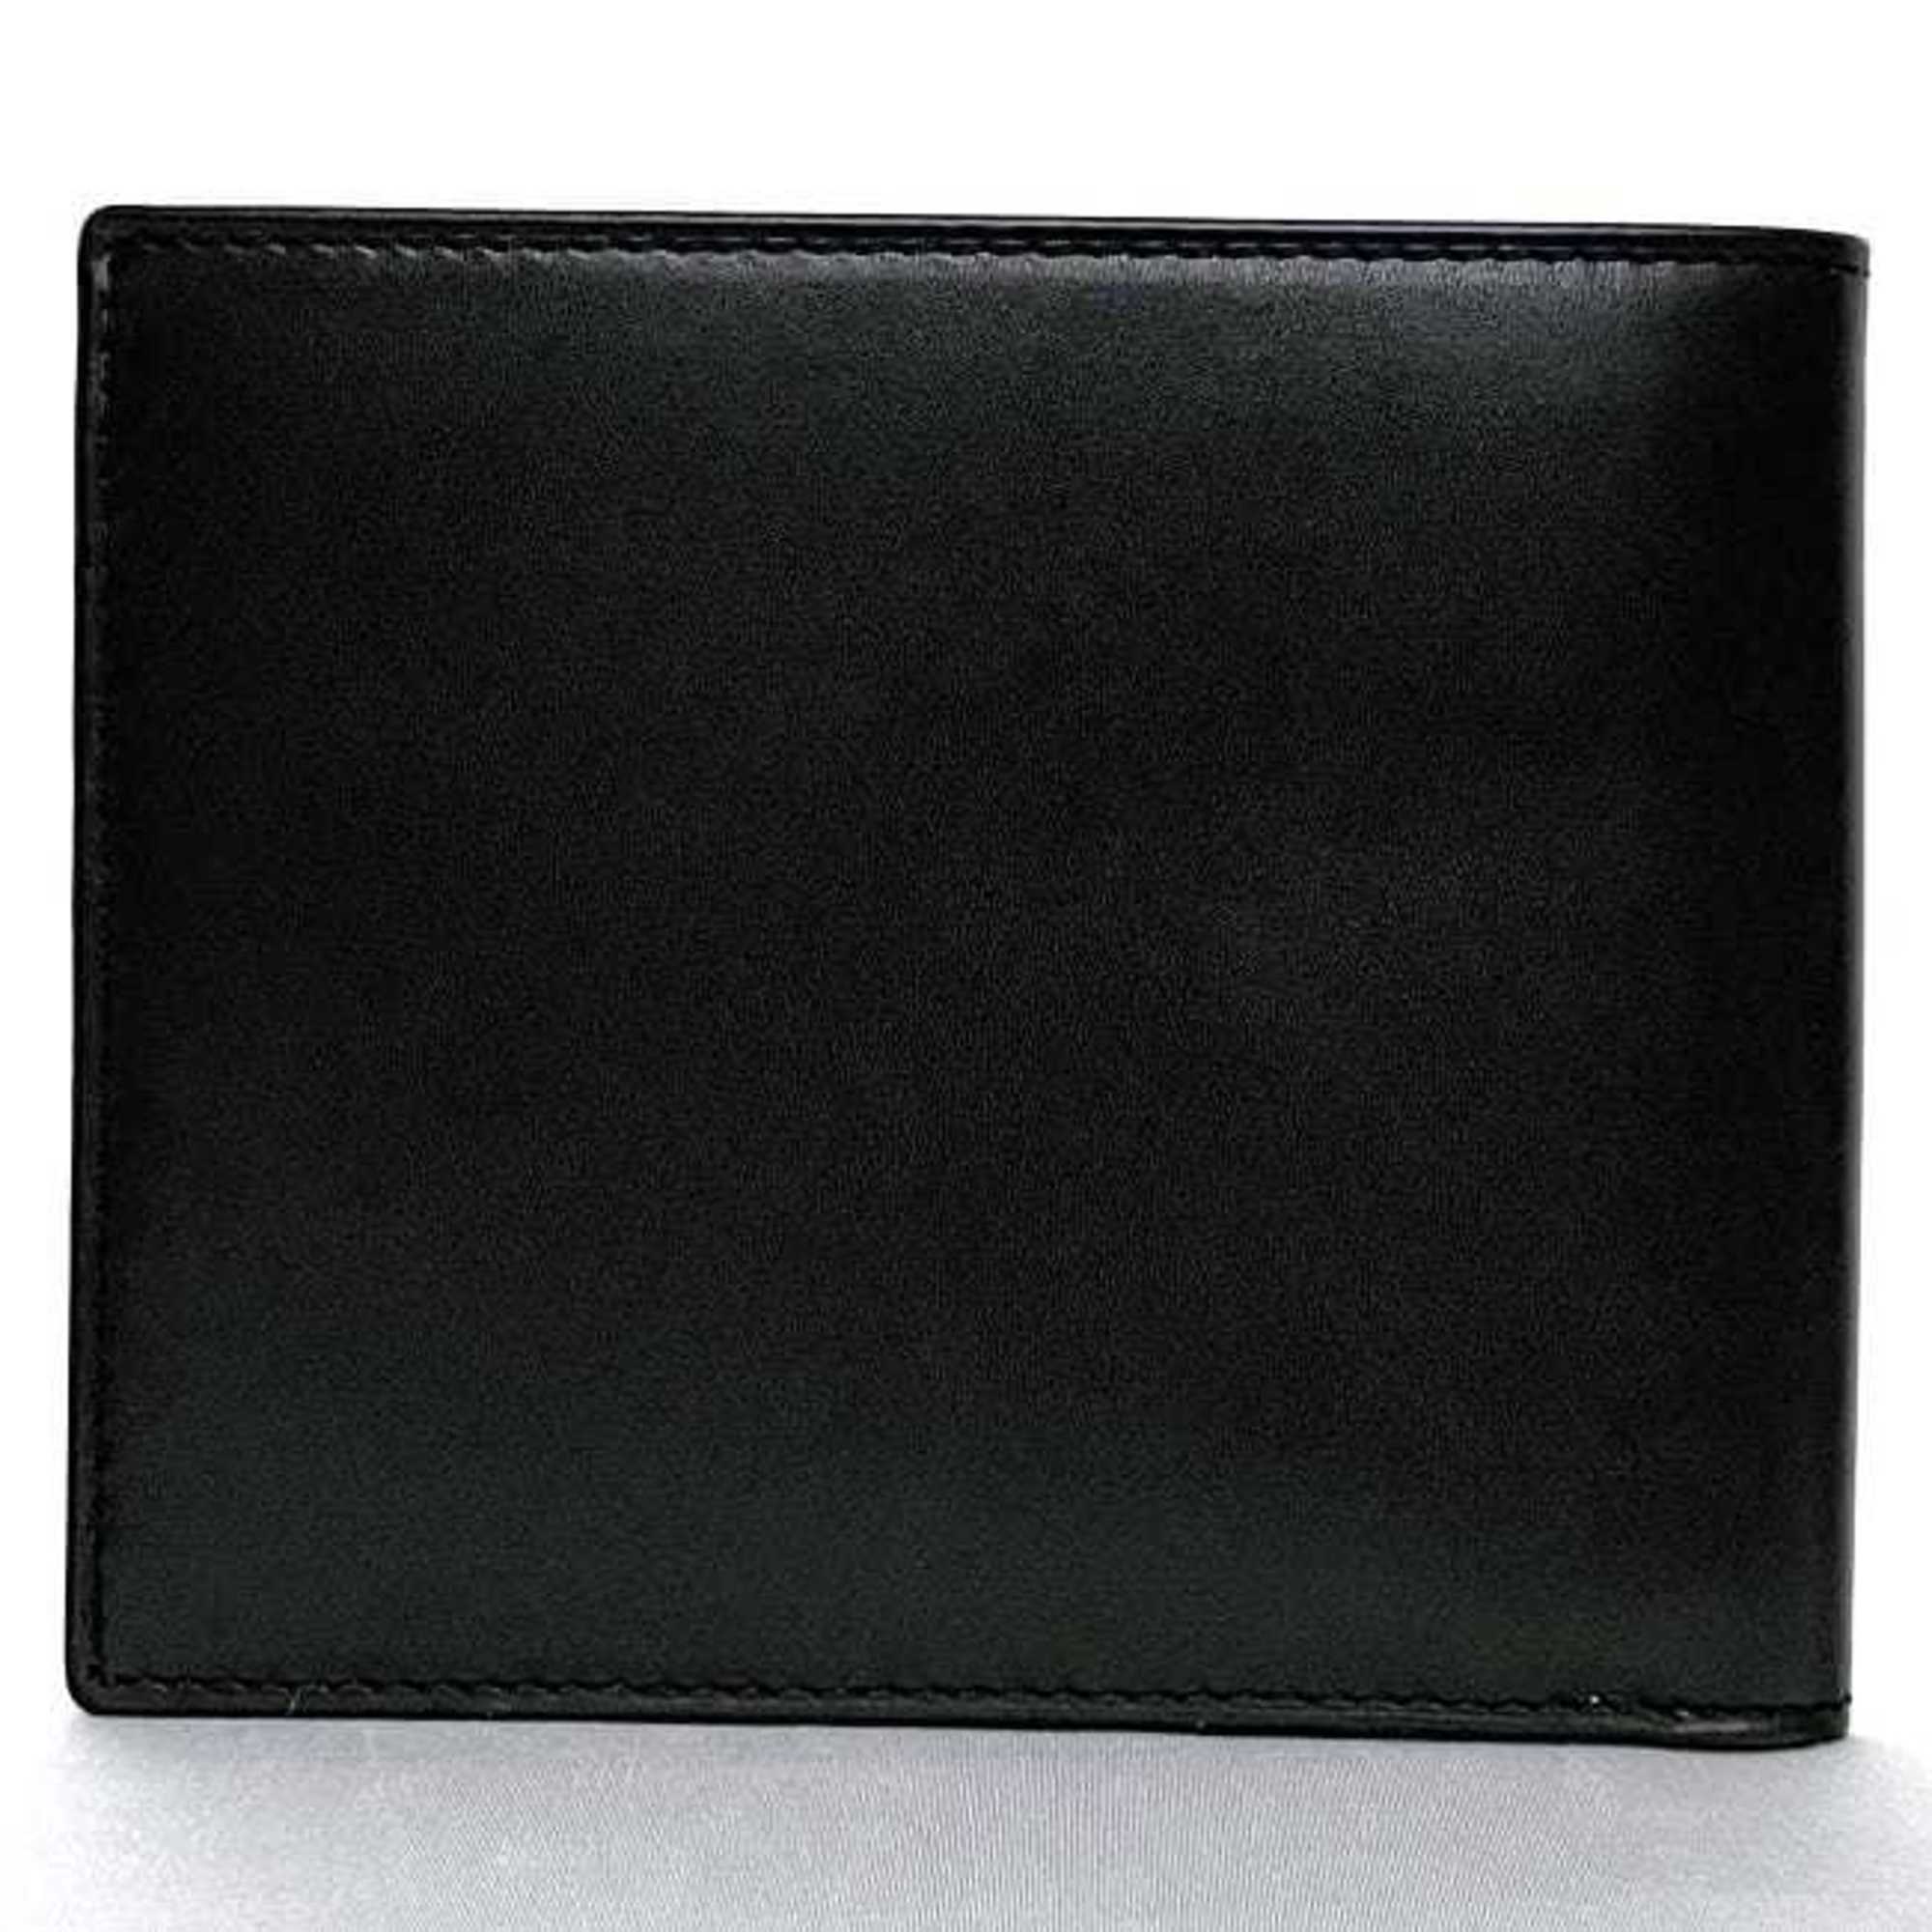 Dunhill Bi-fold Wallet Black LL3070A ec-20092 Leather dunhill Billfold Compact Men's Chic